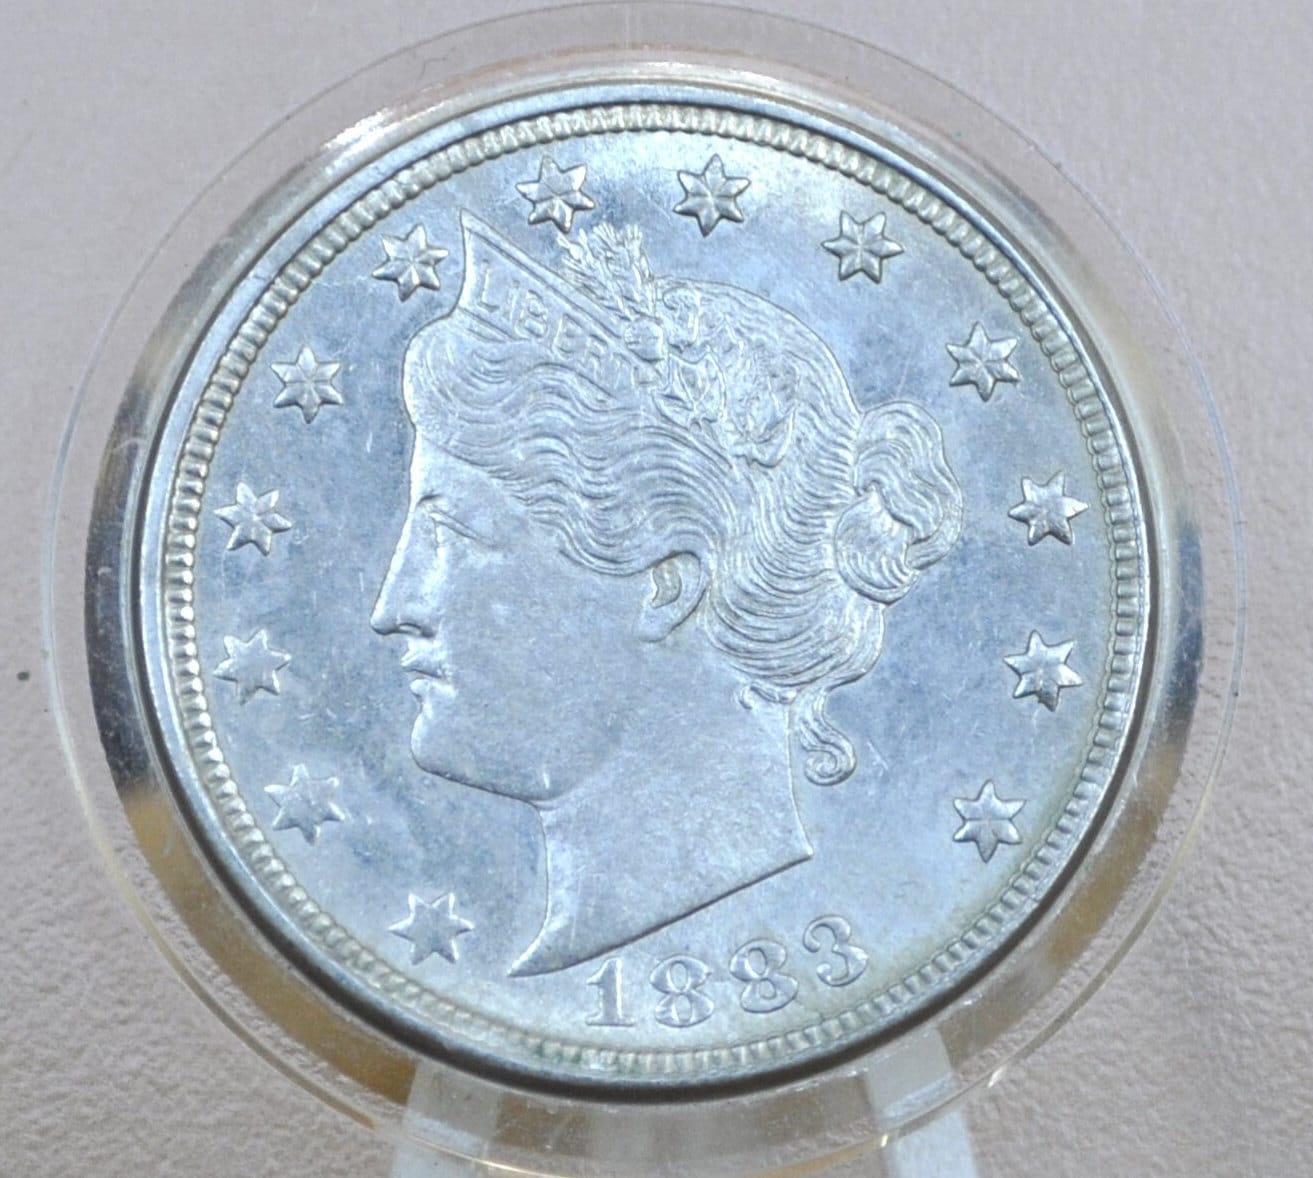 1883 Liberty Head V Nickel - Without Cents - Choose by Grade / Condition - 1883 V Nickel - First Year Produced